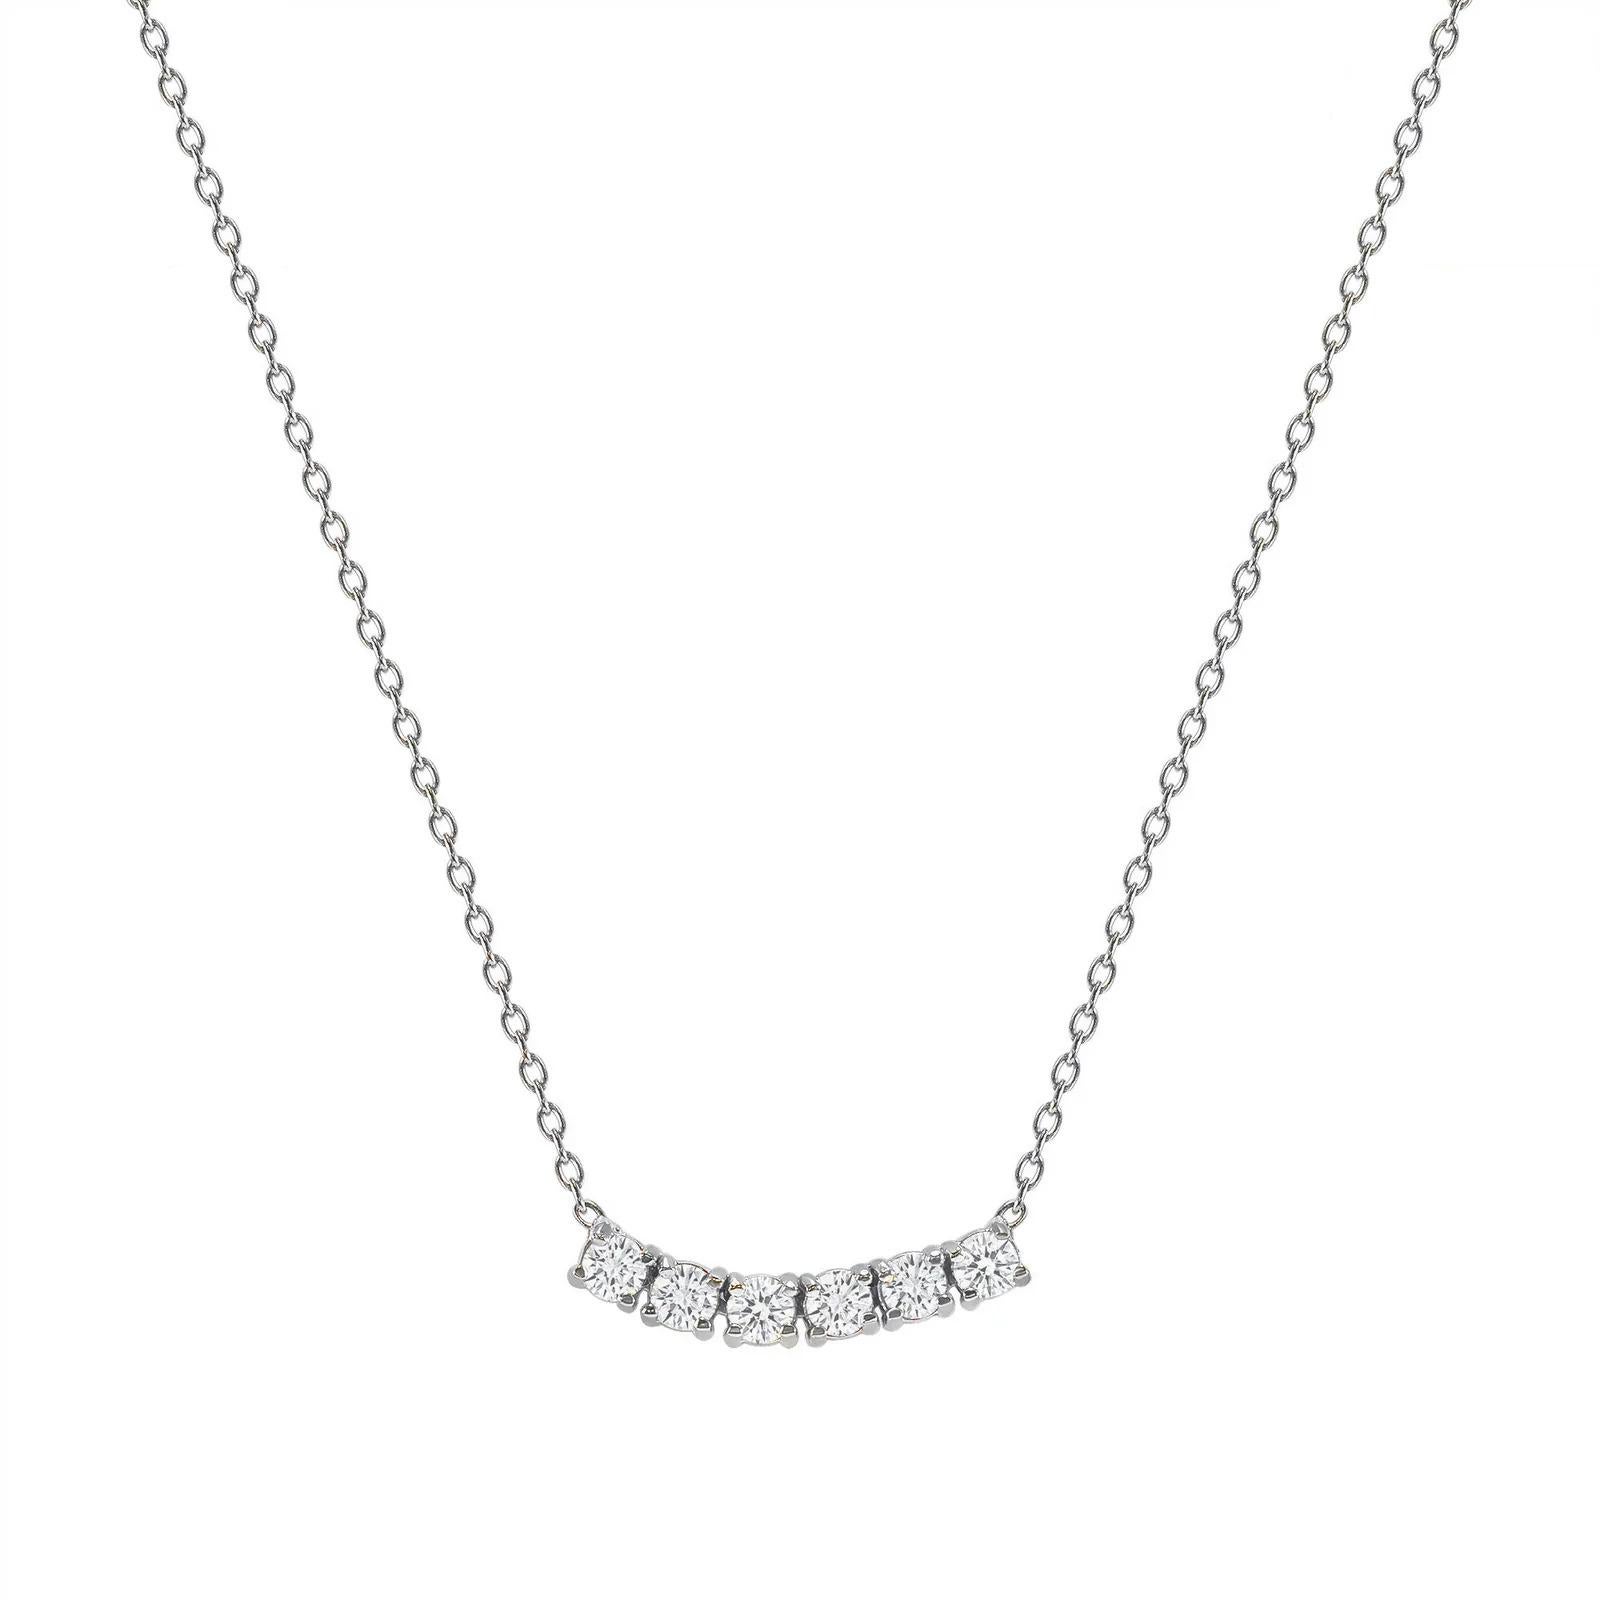 This petite, curved diamond necklace is crafted with gorgeous 14k gold set with six round diamonds.  

Gold: 14k 
Diamond Total Carats: 1.5 ct
Diamond Cut: Round (6 diamonds)
Diamond Clarity: VS
Diamond Color: F
Color: White Gold
Necklace Length: 18